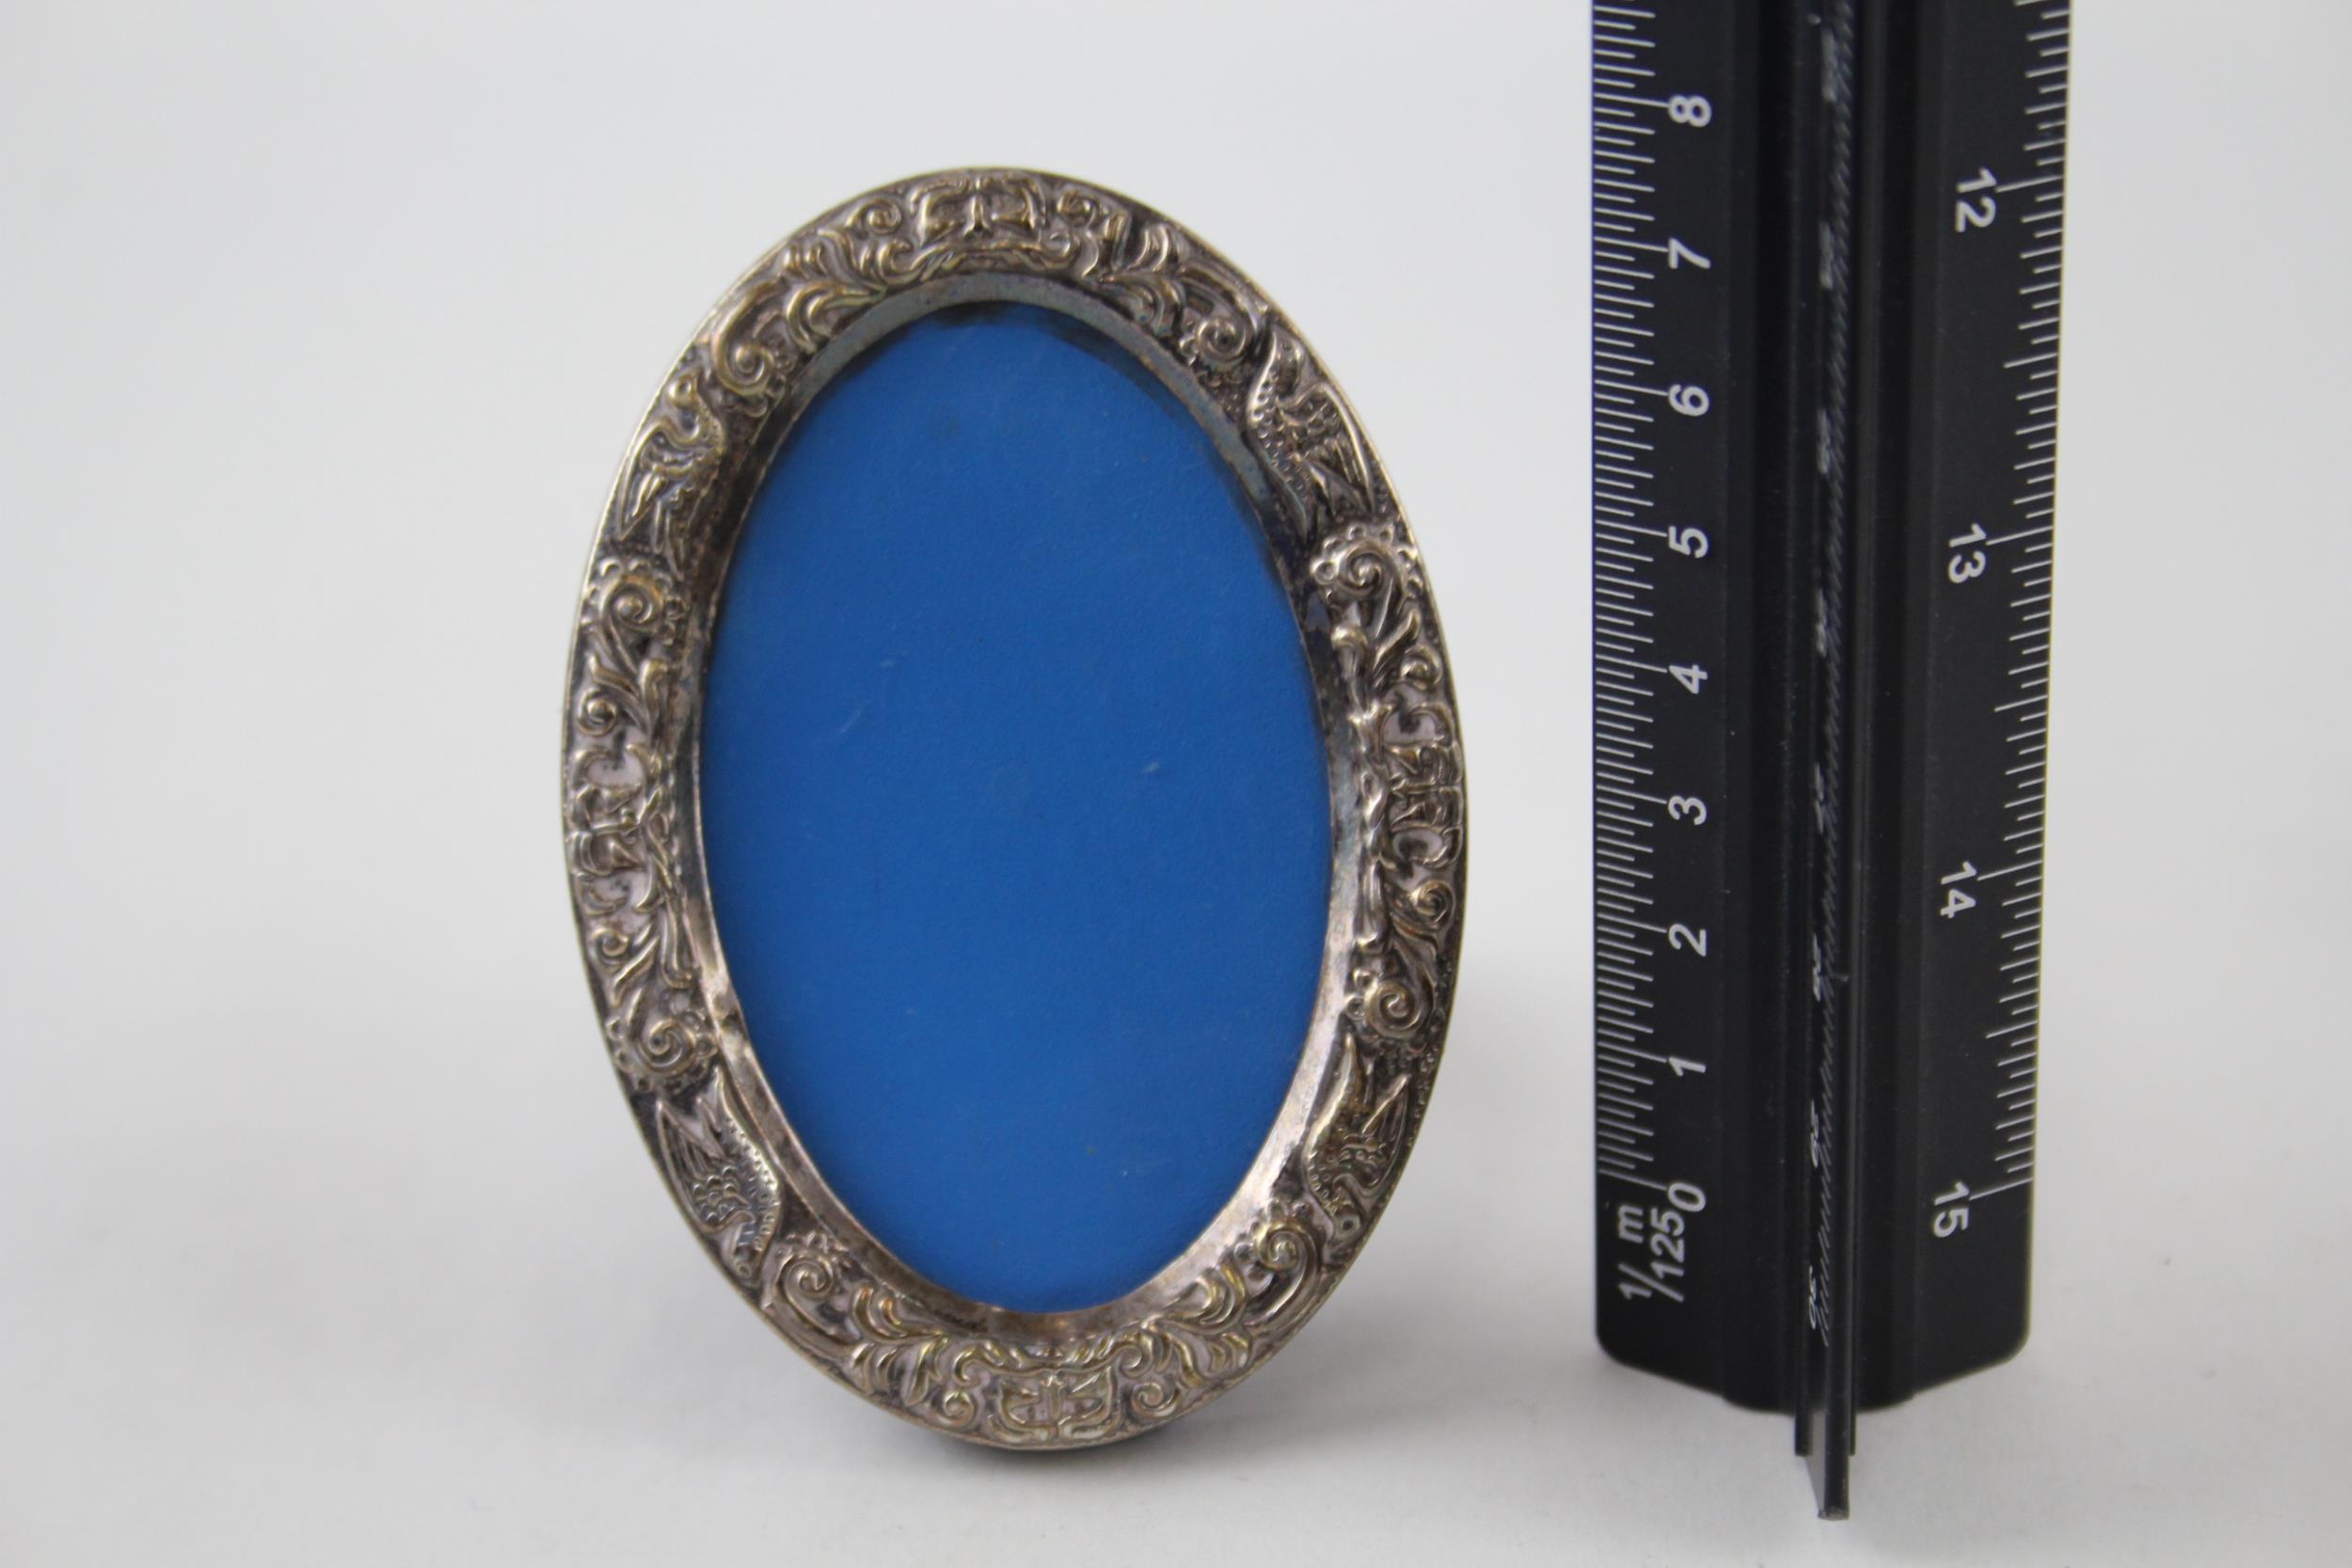 5 x Vintage HM .925 Sterling Silver Miniature / Small Photograph Frames (63g) - In vintage condition - Image 7 of 7